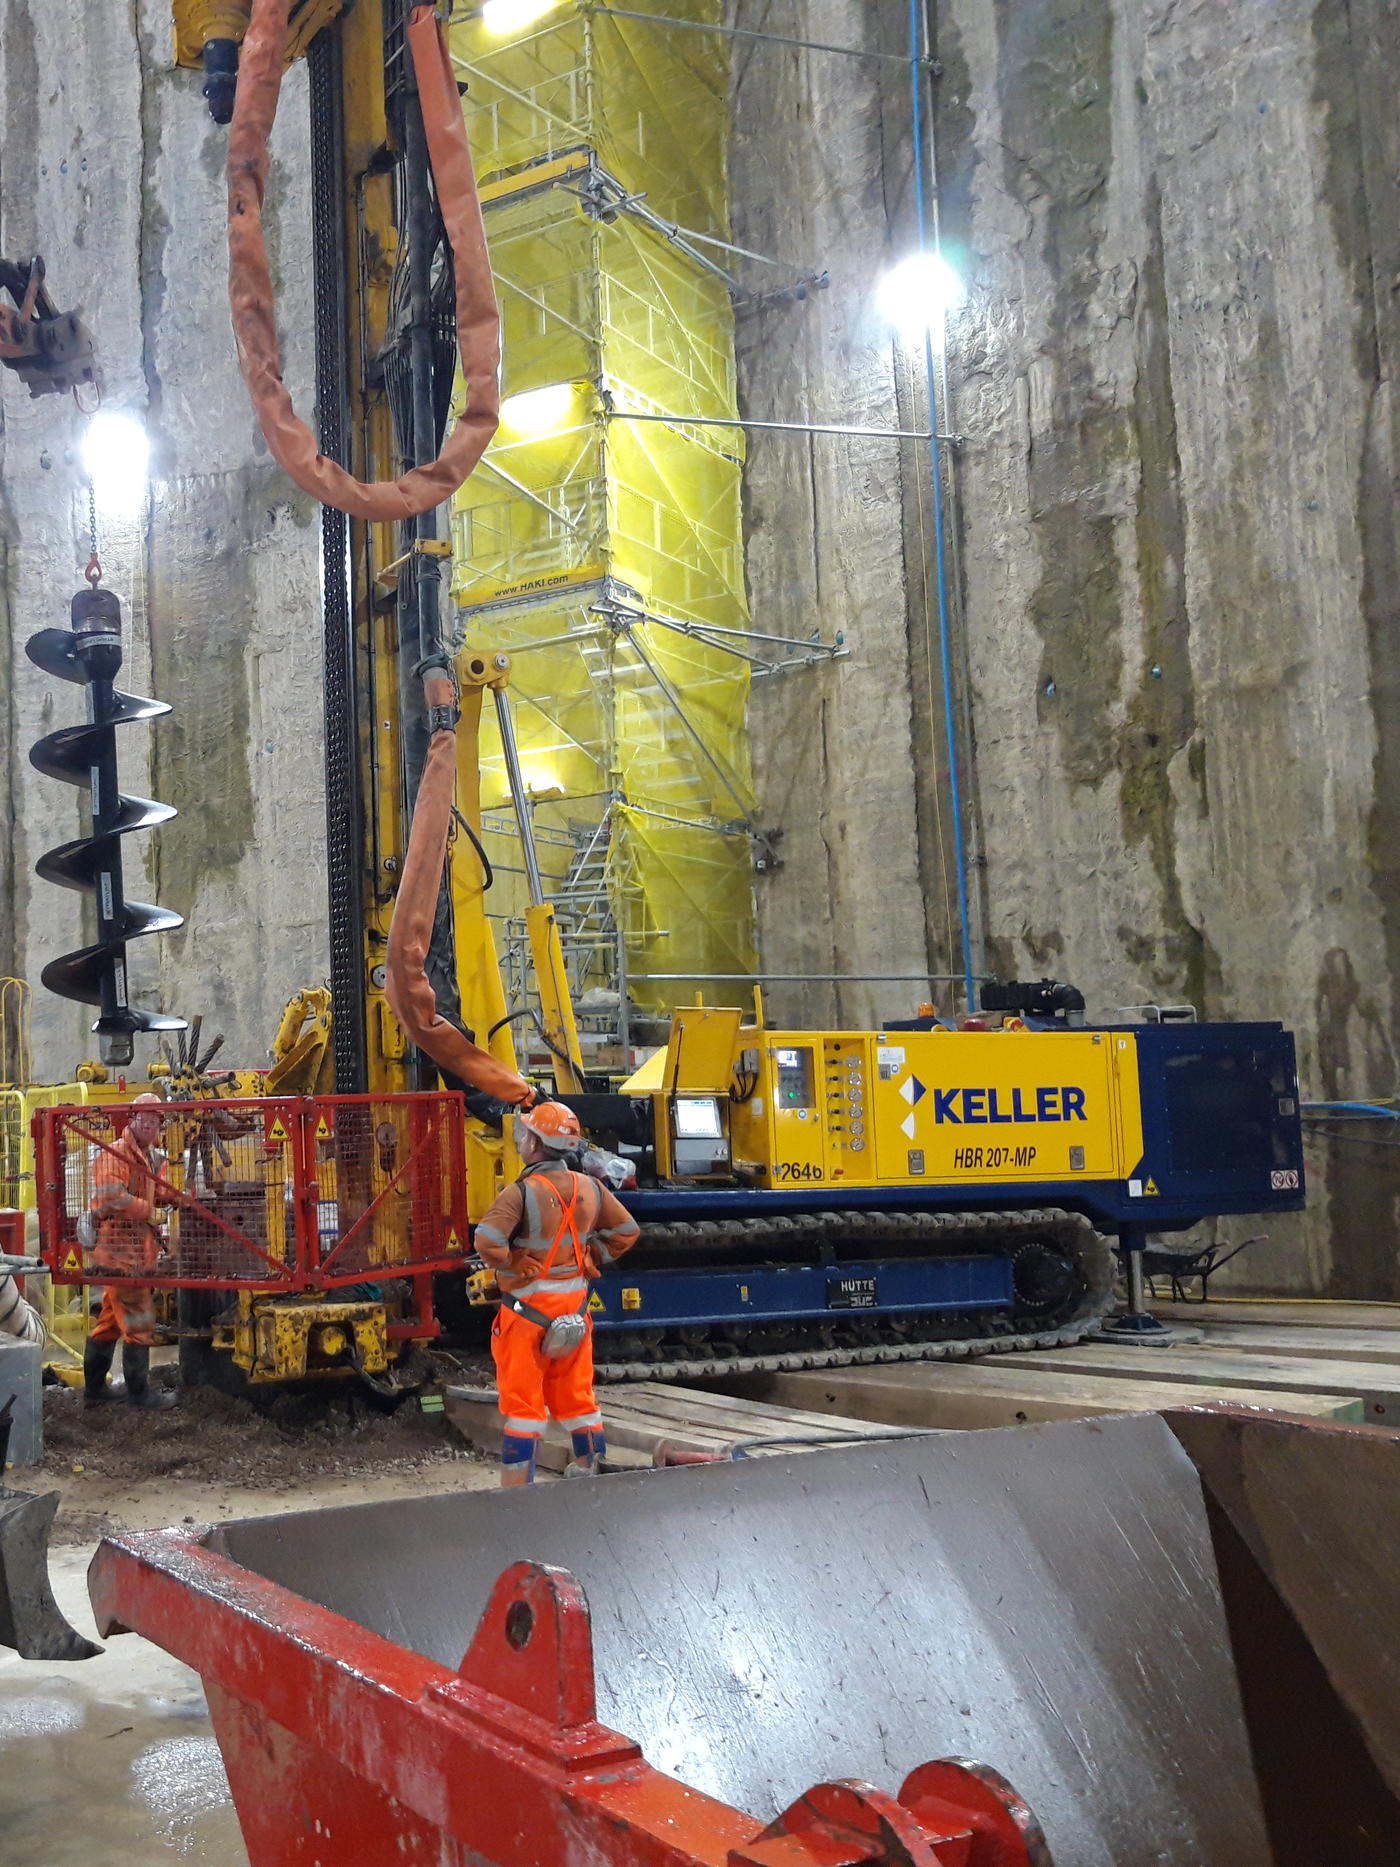 Keller's rig working in the shaft